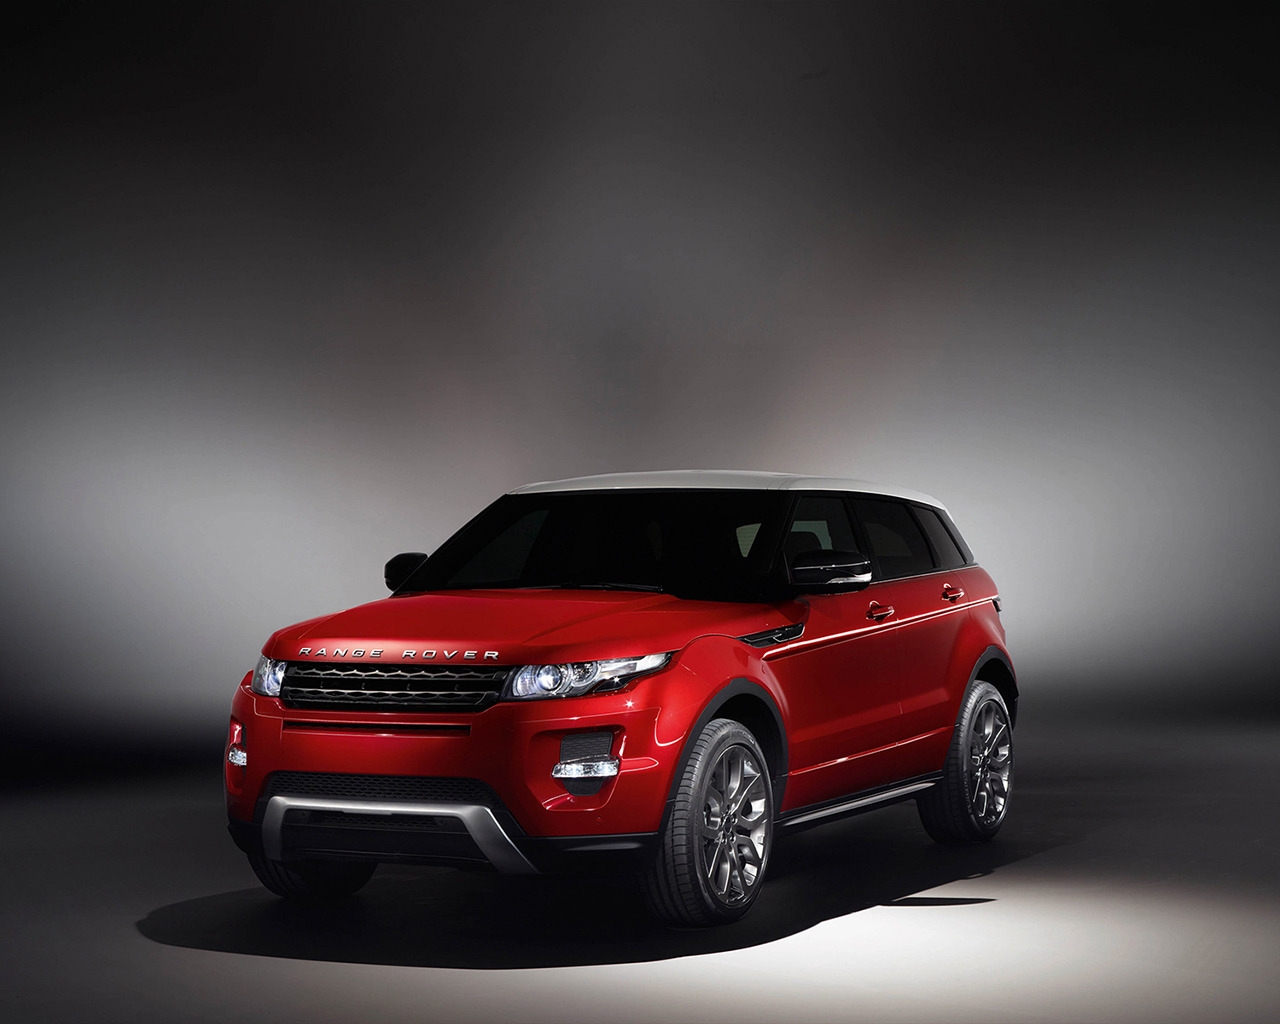 2012 Range Rover Evoque Red for 1280 x 1024 resolution